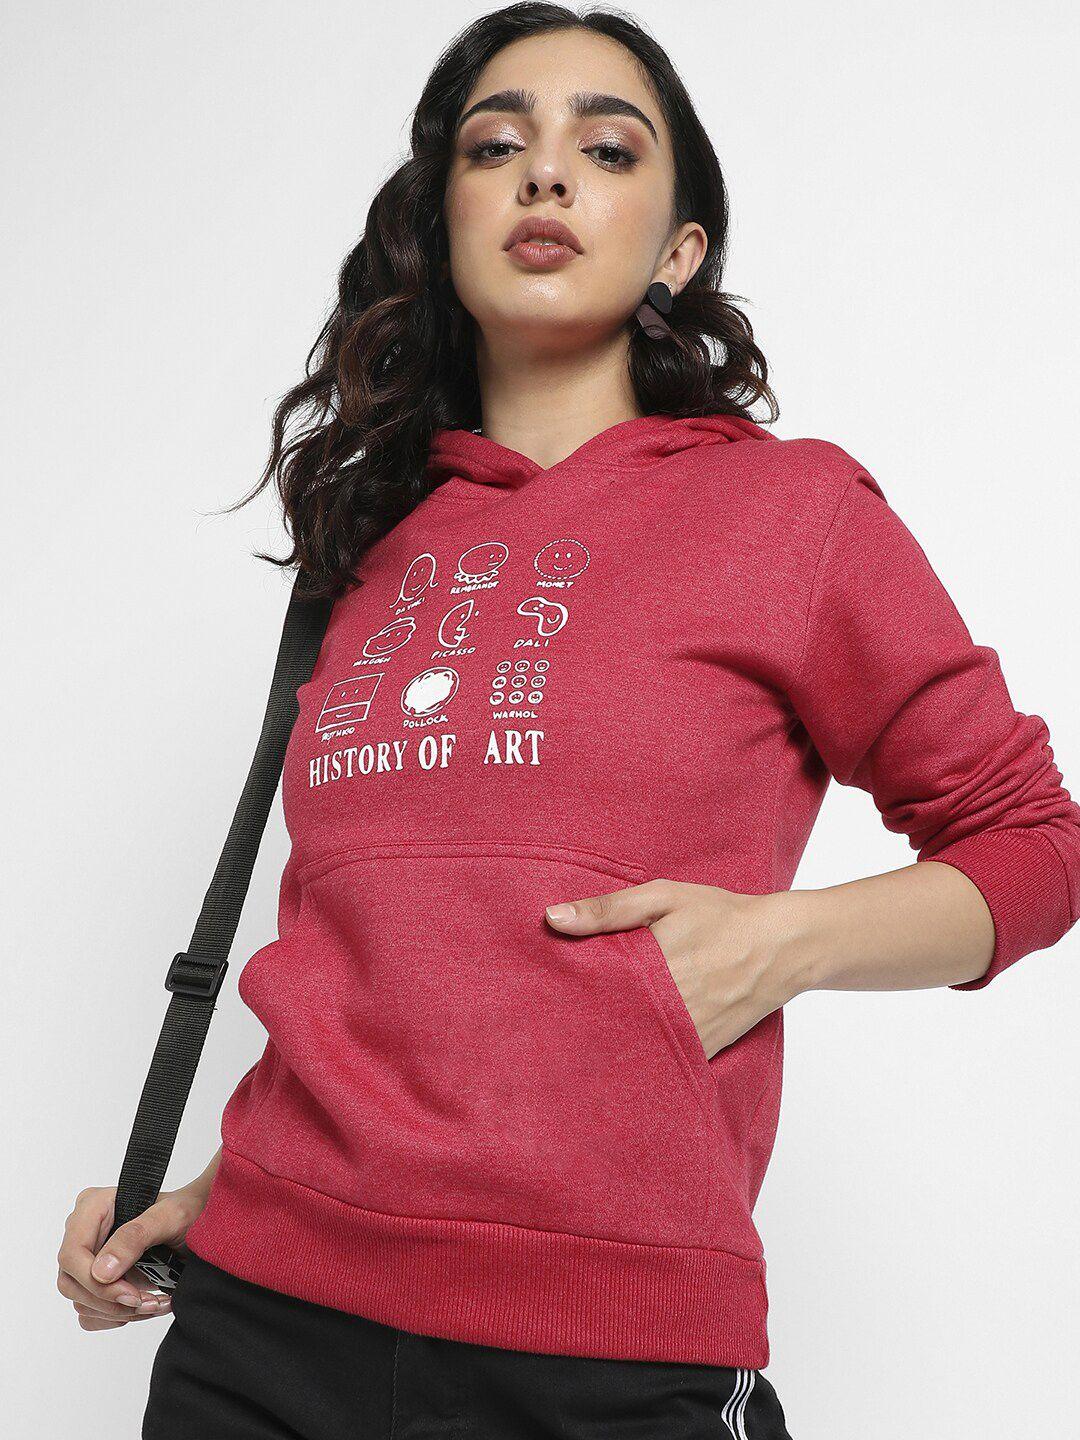 Campus Sutra Graphic Printed Hooded Cotton Pullover Sweatshirt